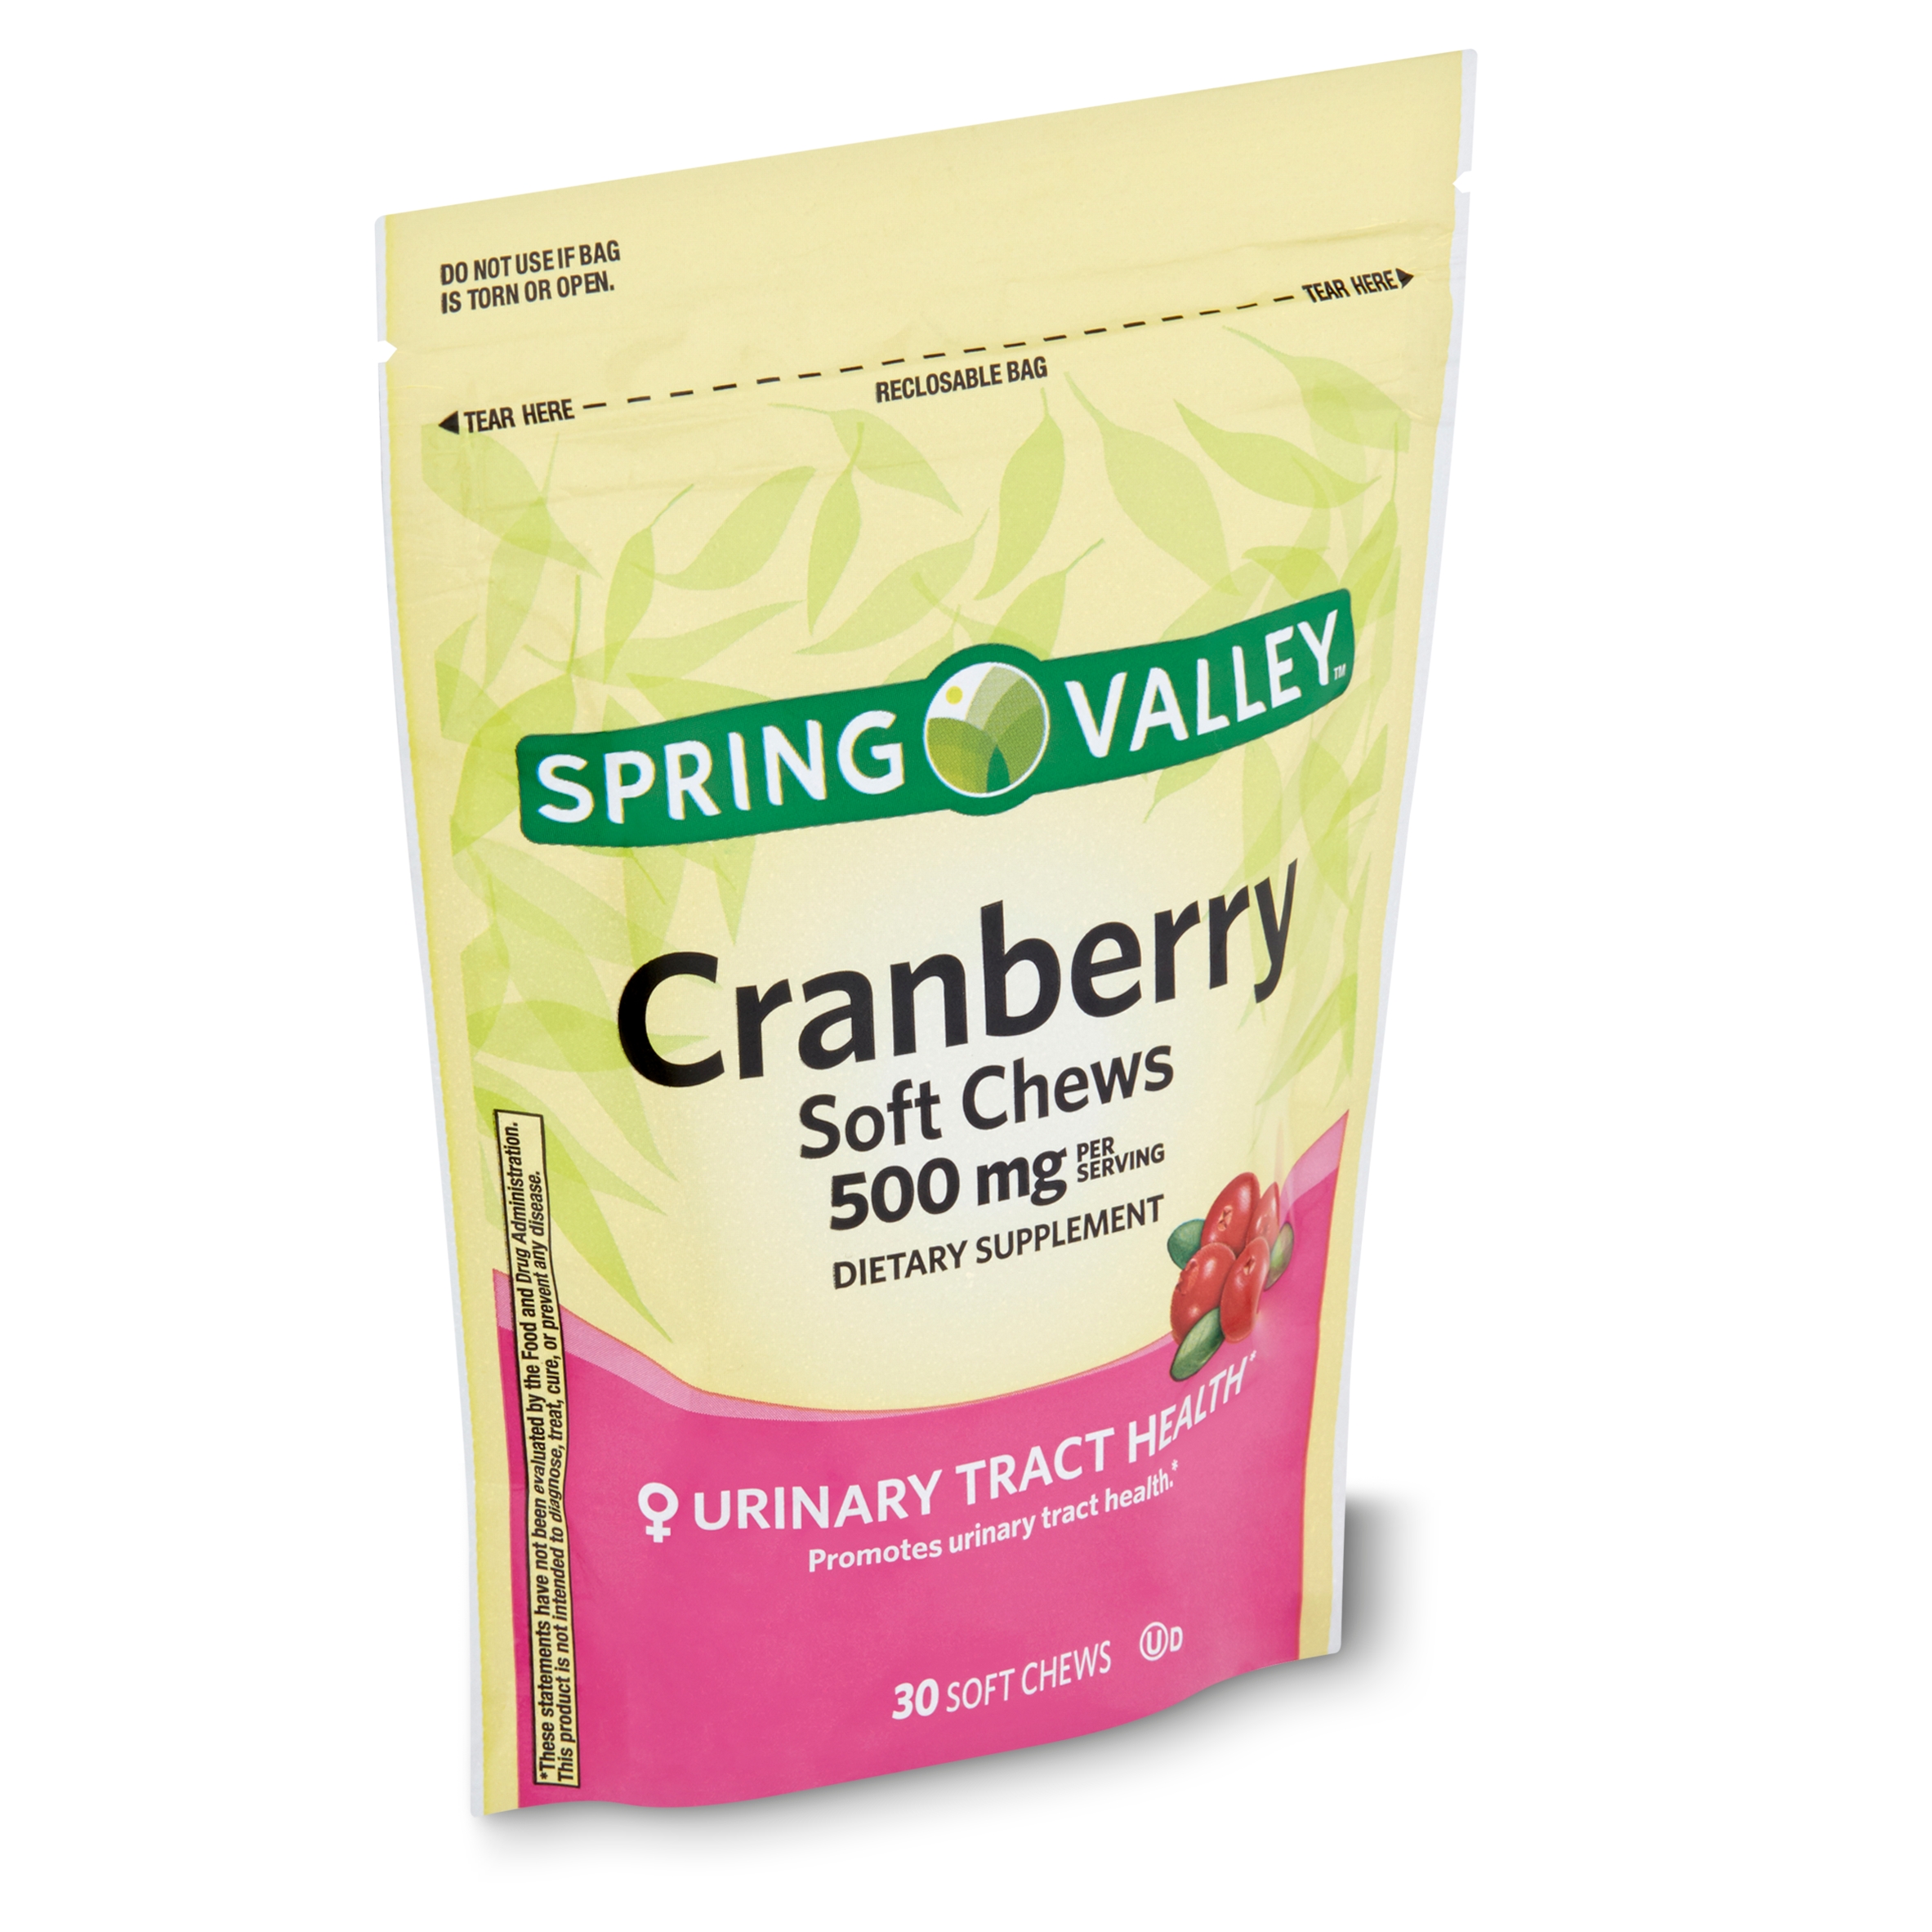 Spring Valley Cranberry Urinary Tract Health Dietary Supplement Soft Chews, 500 mg, 30 Count - image 1 of 9